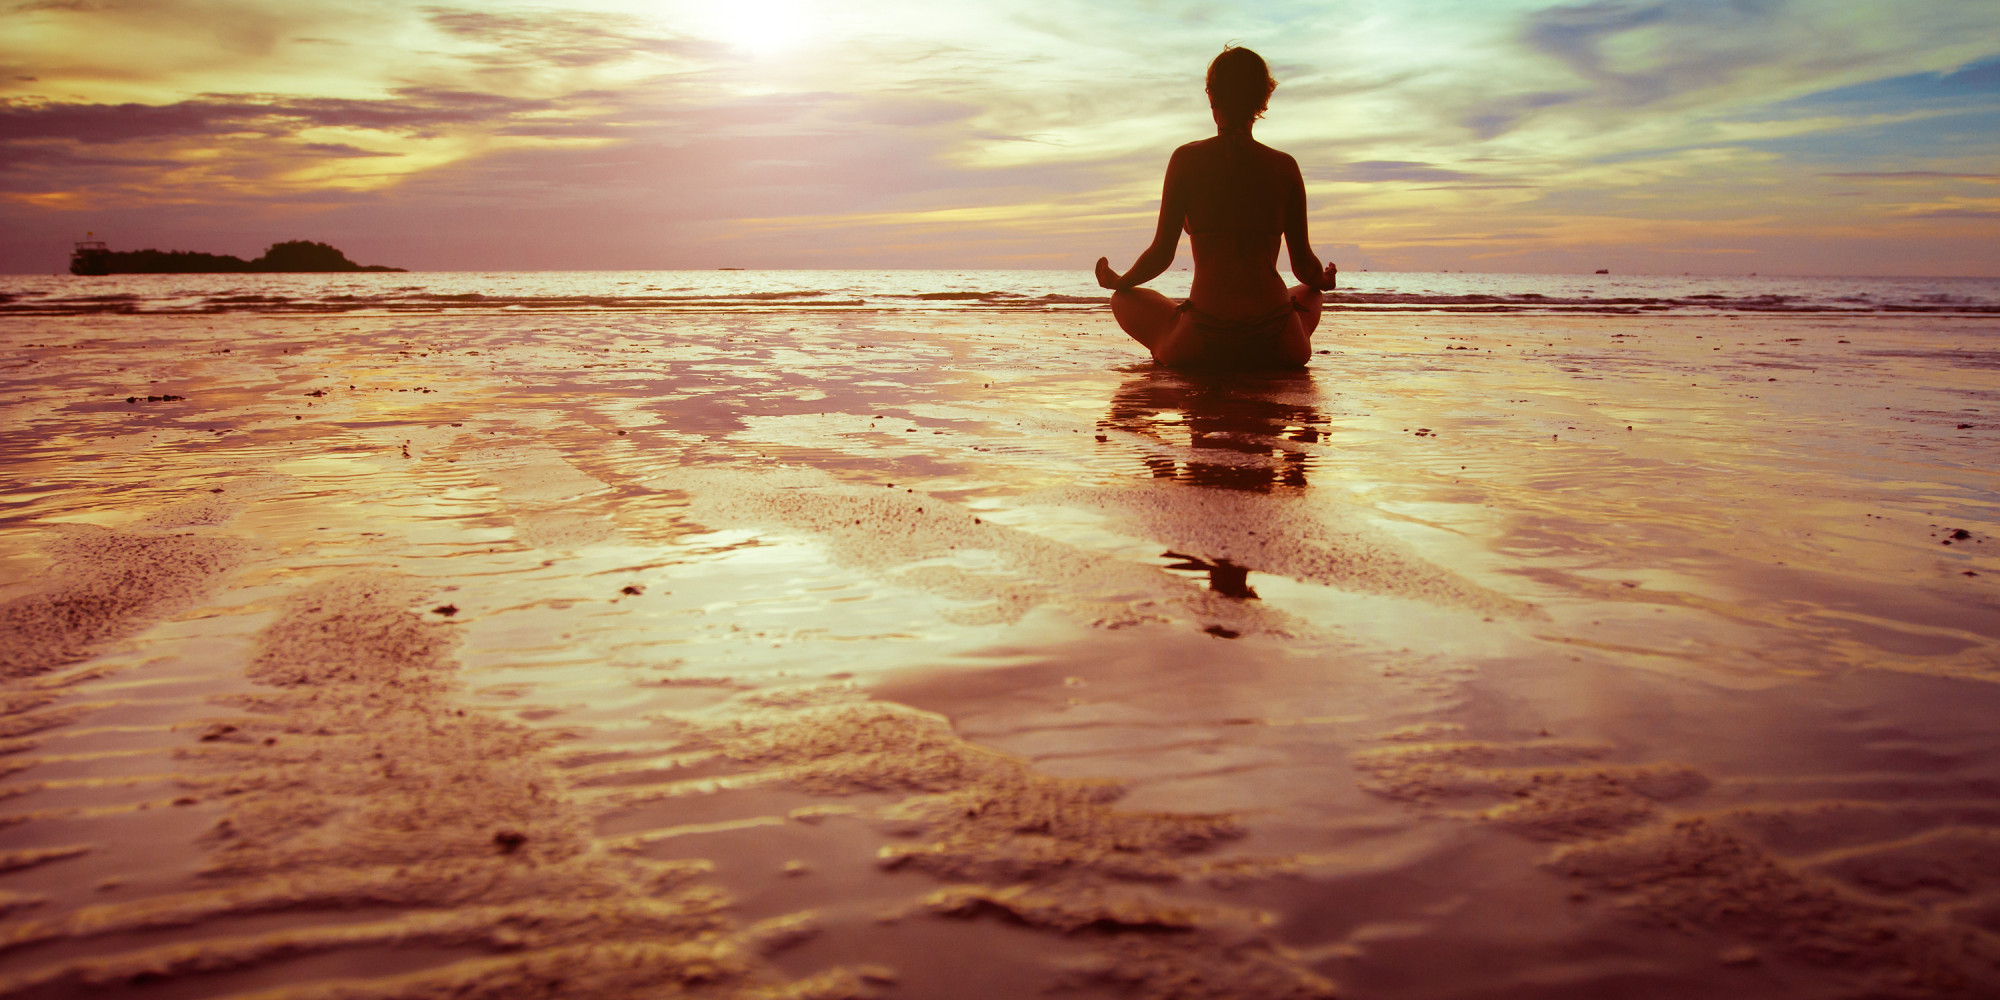  A person sits in meditation pose on a beach with the ocean and sky in the background.